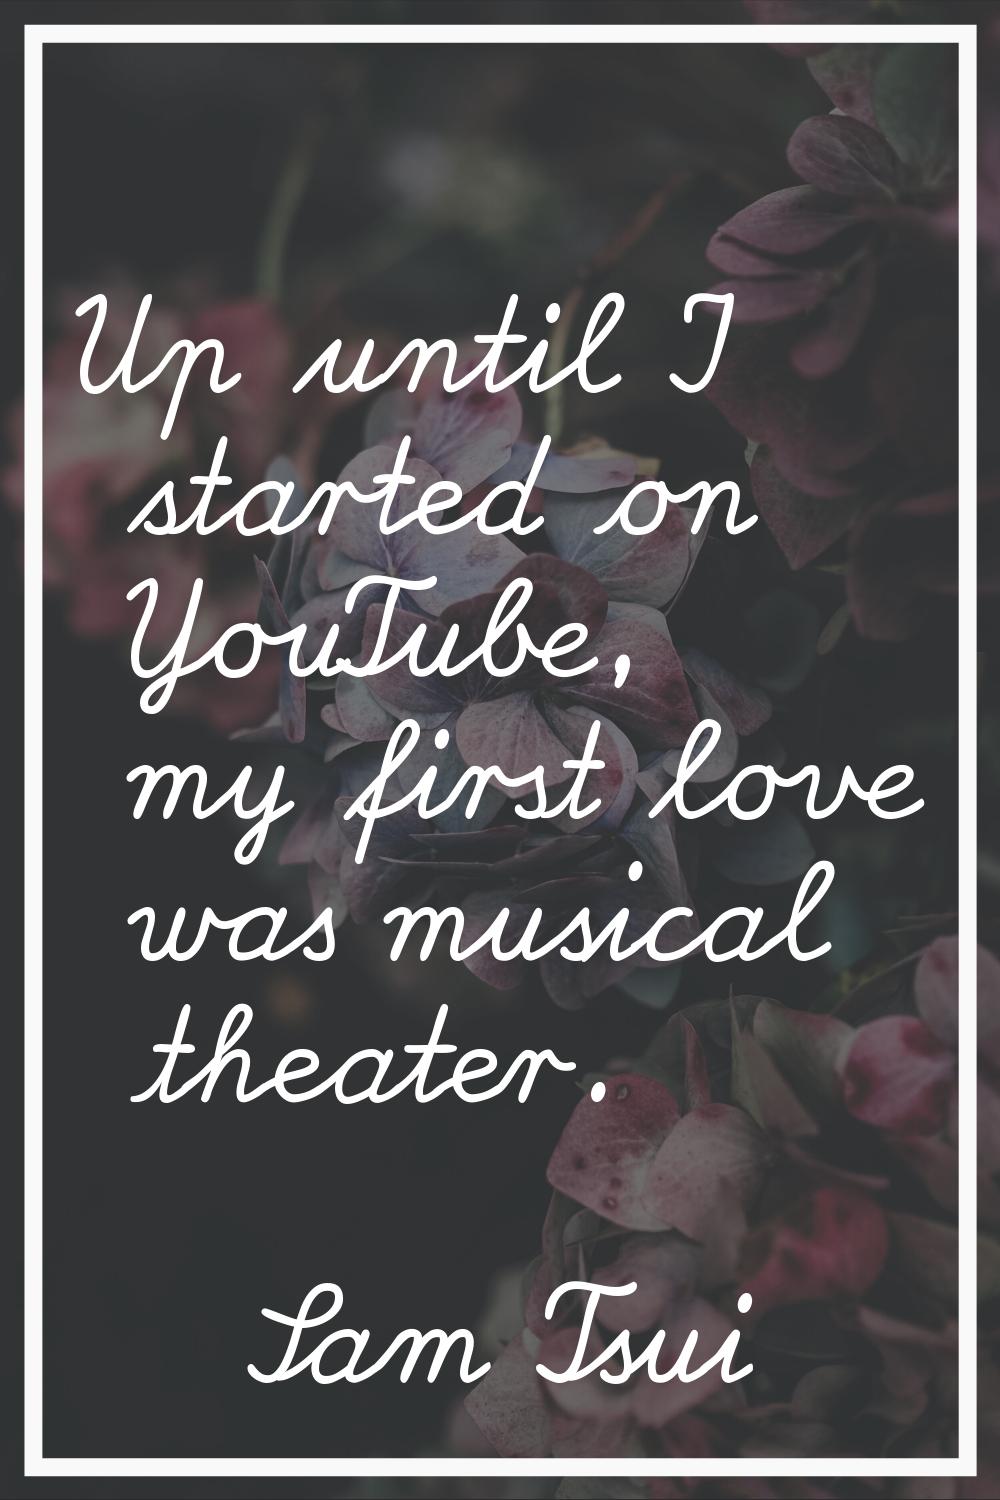 Up until I started on YouTube, my first love was musical theater.